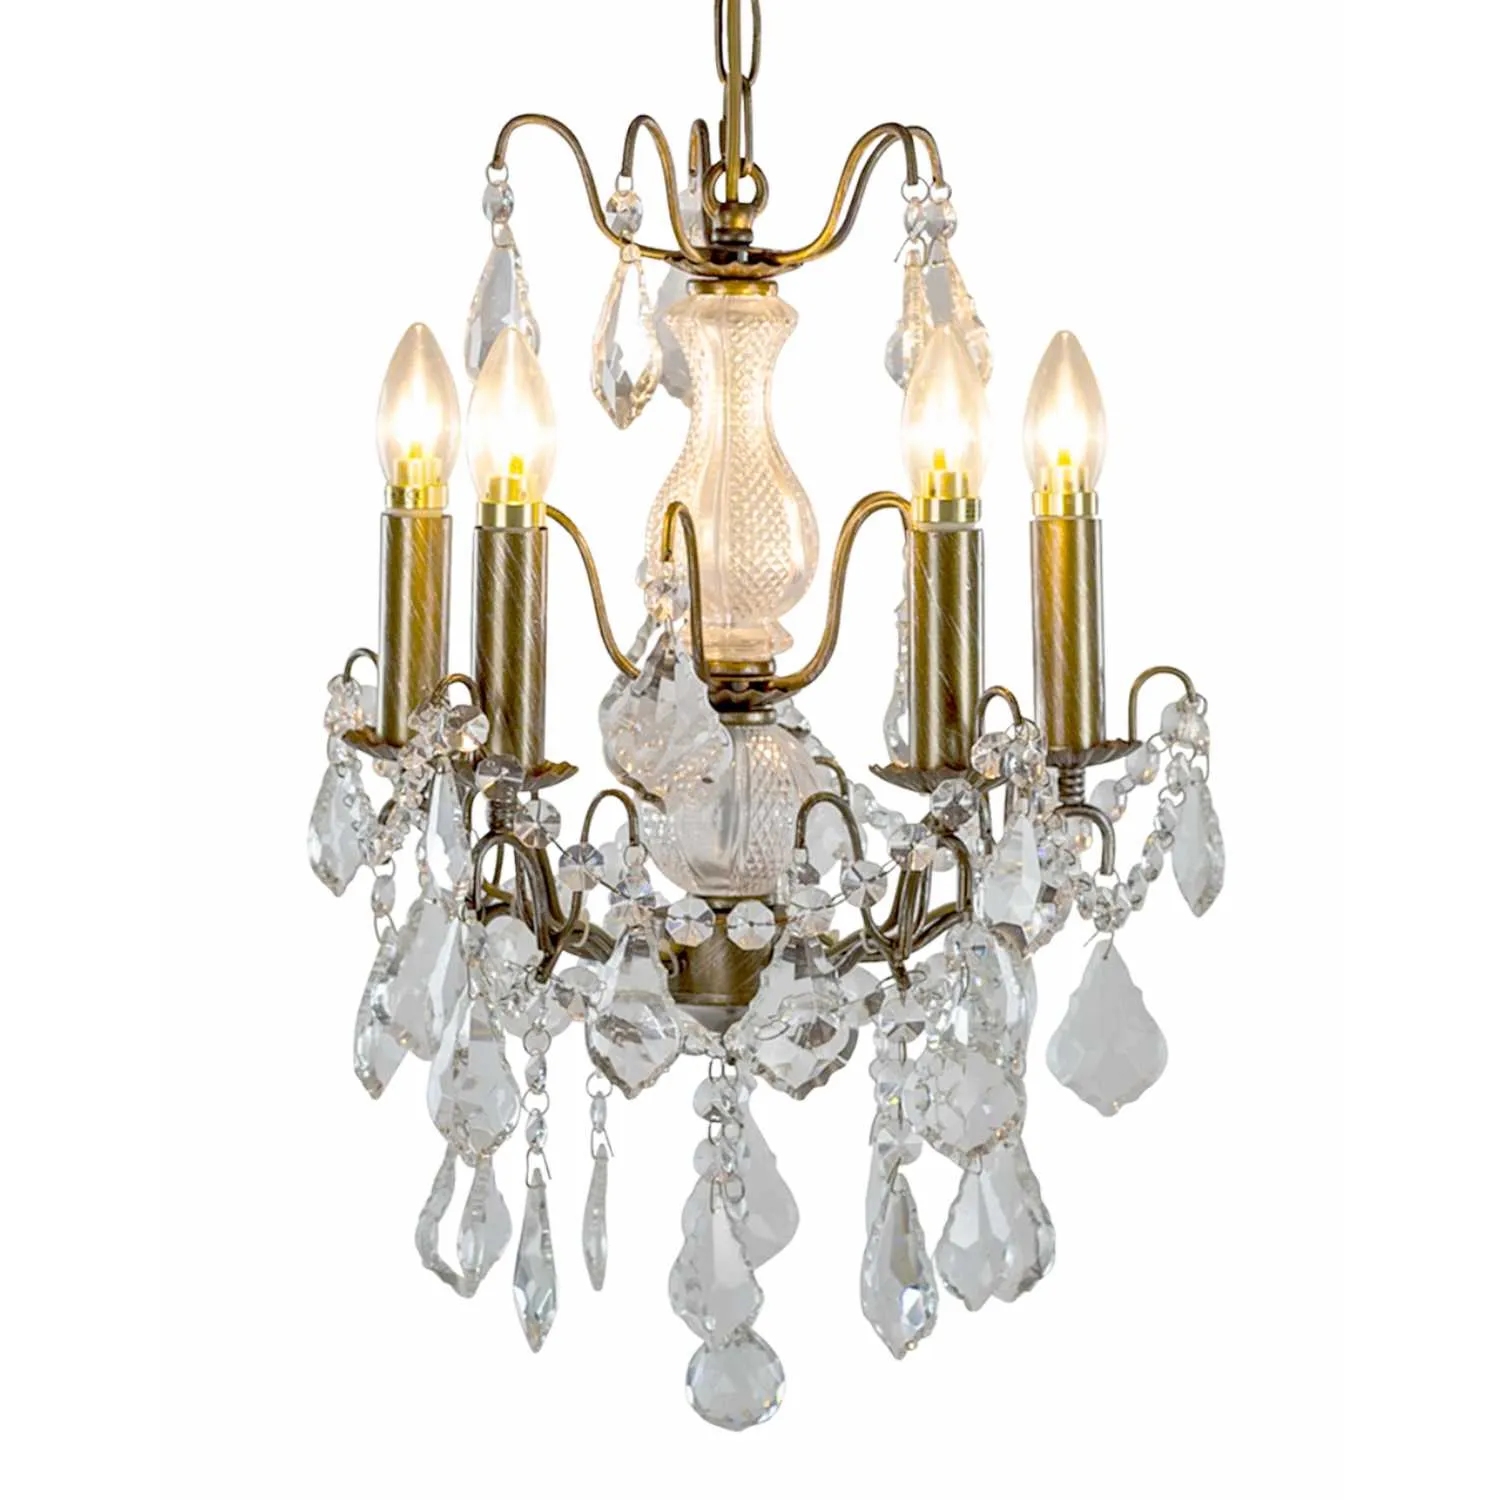 Small Gold 5 Branch French Glass Cut Chandelier